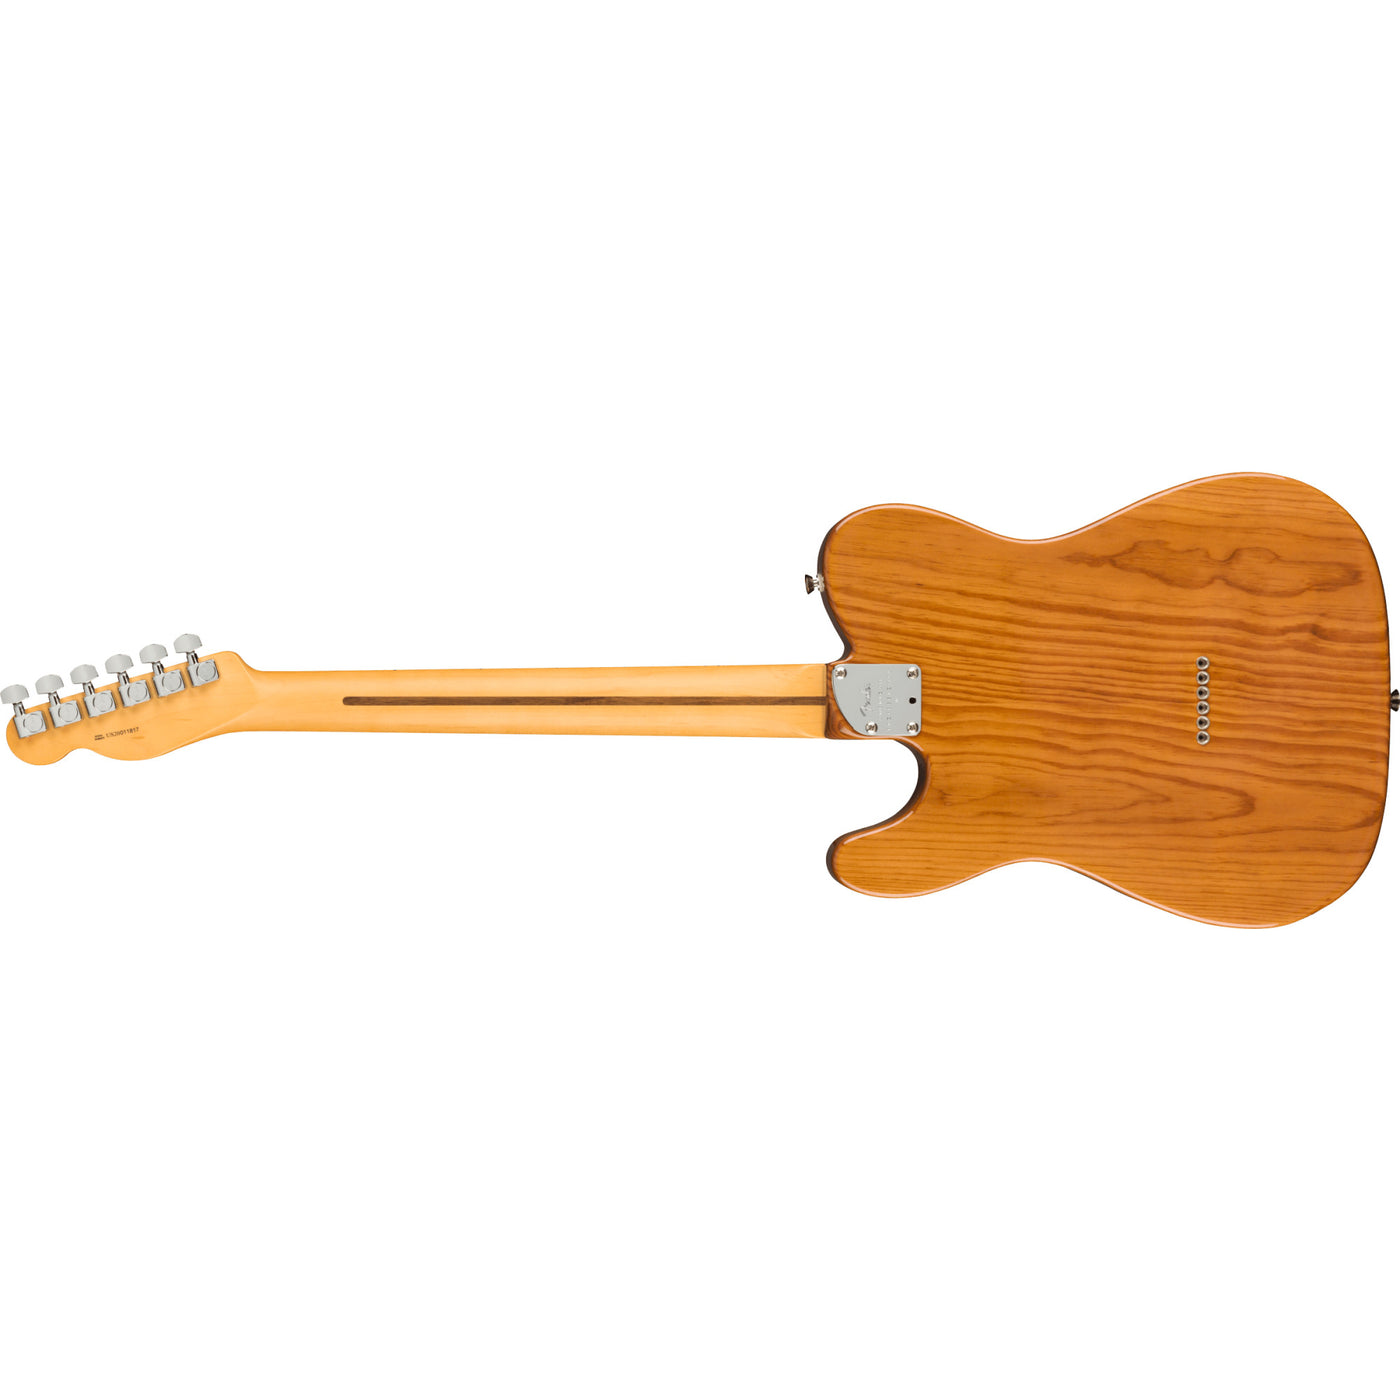 Fender American Professional ll Telecaster Electric Guitar Roasted Pine (0113942763)